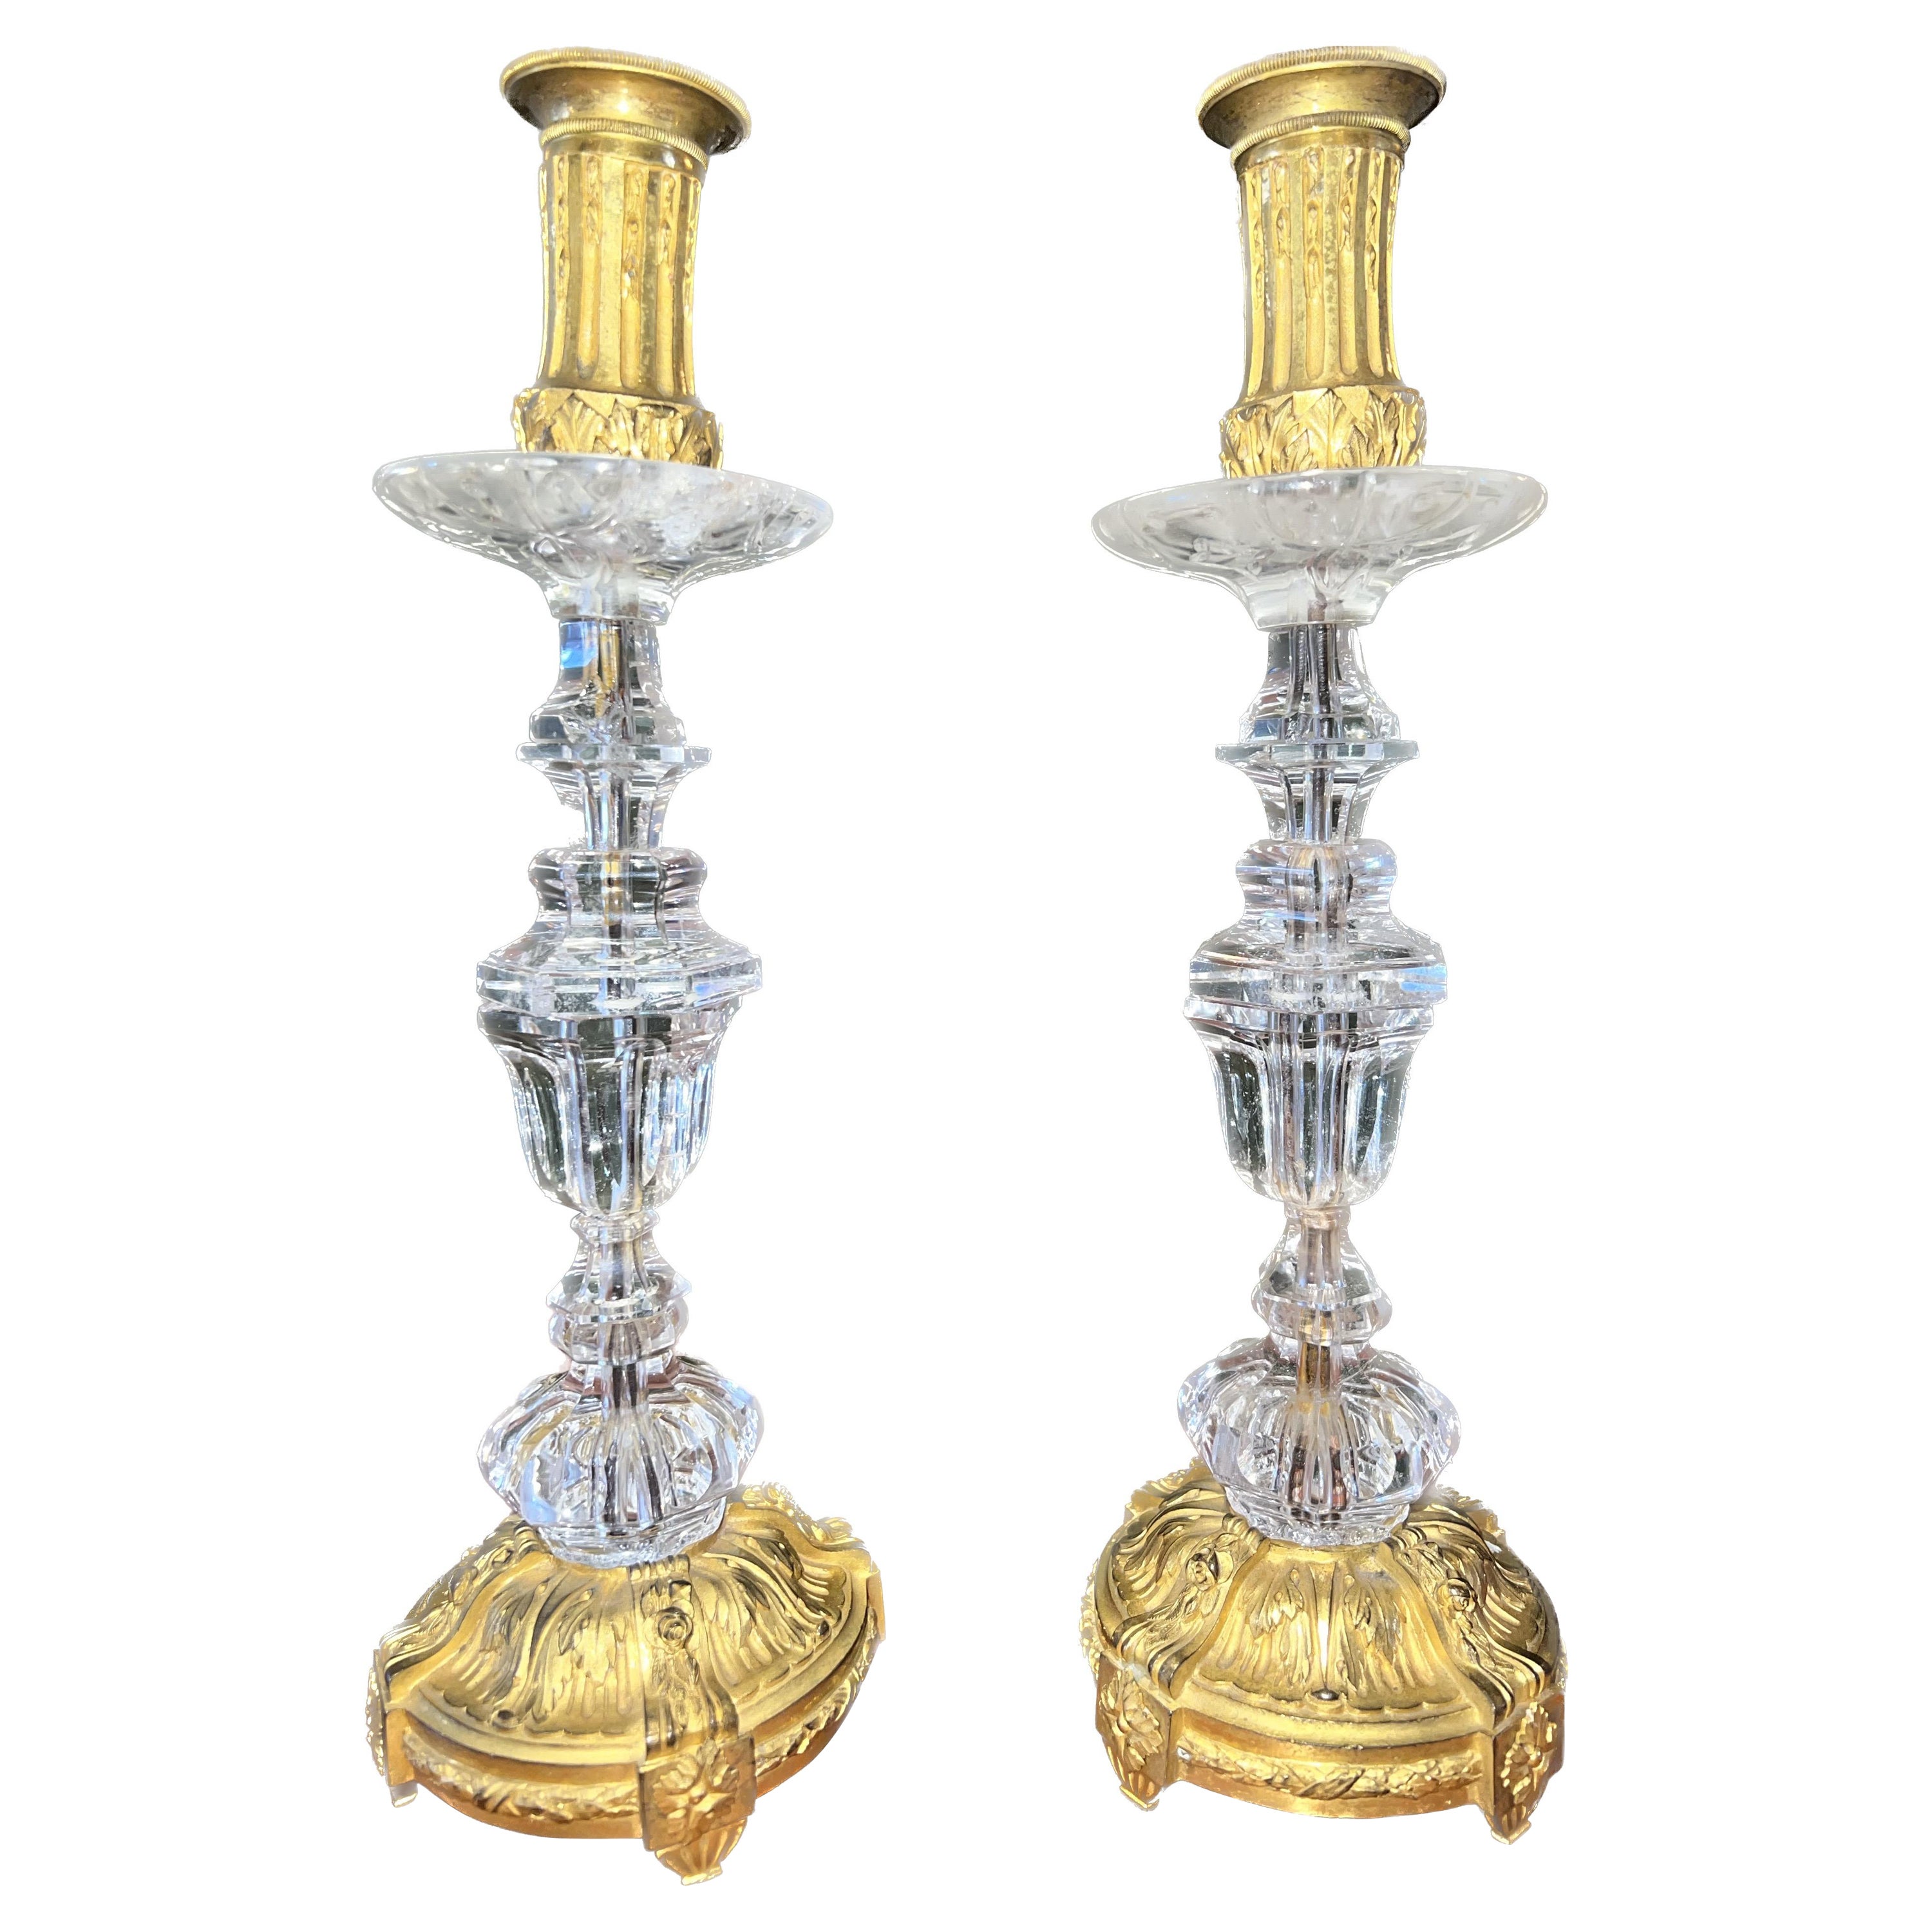 Mr. Giallo is opening his personal vault to sell a collection of his treasured antiques he's held on for so long.

ABOUT ITEM. 
Item originally bought by Vito at Sotheby's Auction, late 1980s. Gorgeous pair of 1820s goldleaf rock crystal